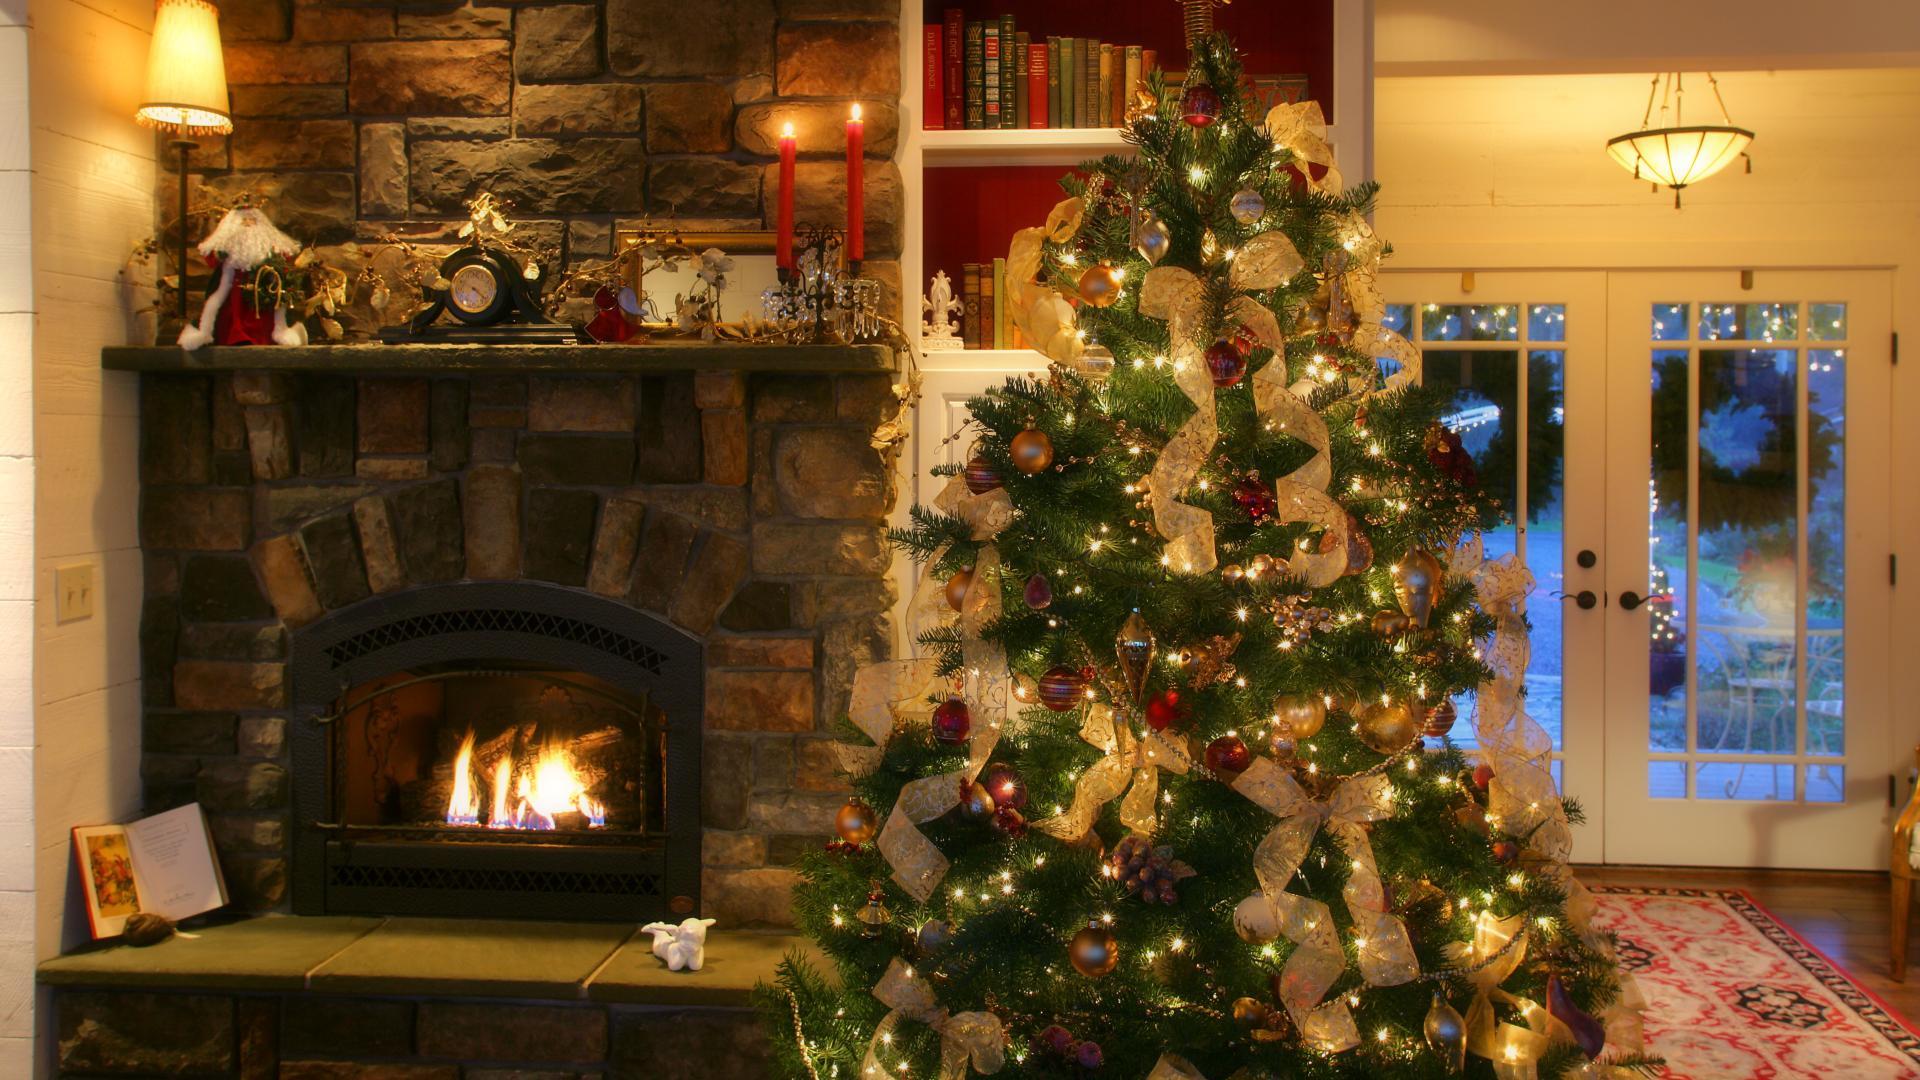 Download Wallpaper new year christmas tree fireplace